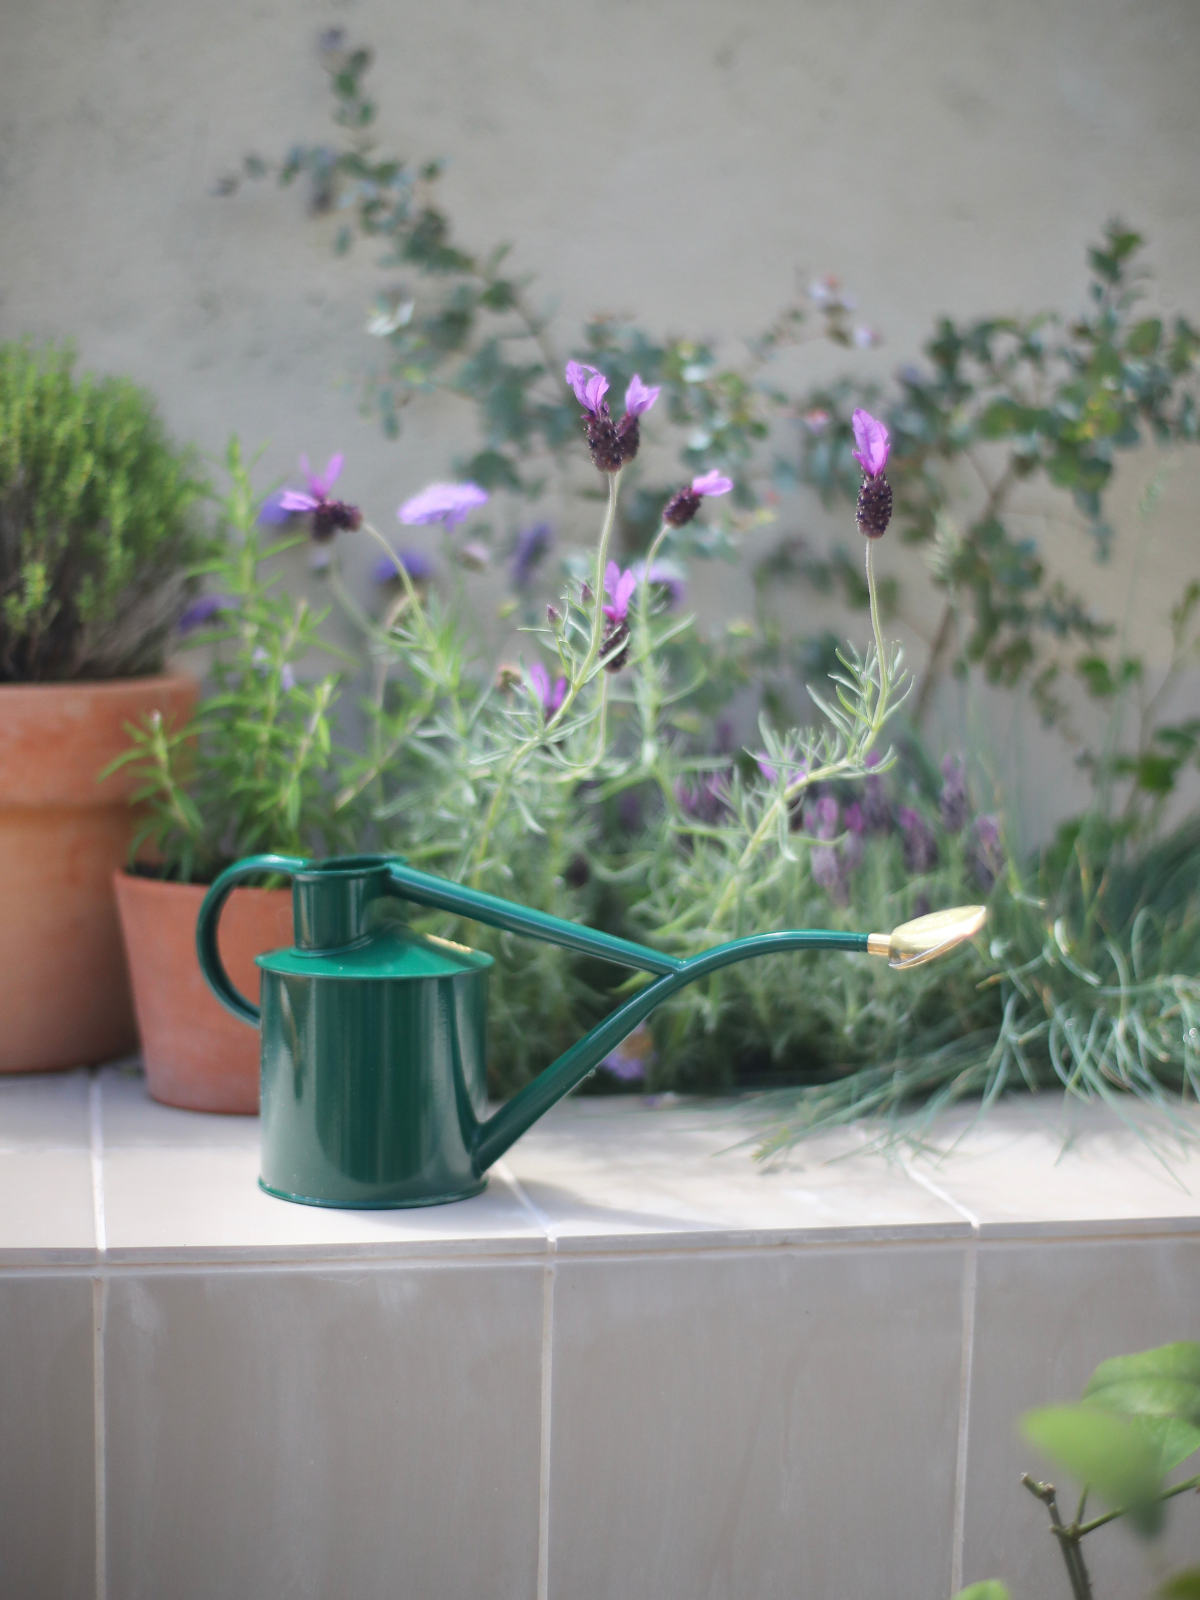 A watering can with pot plants